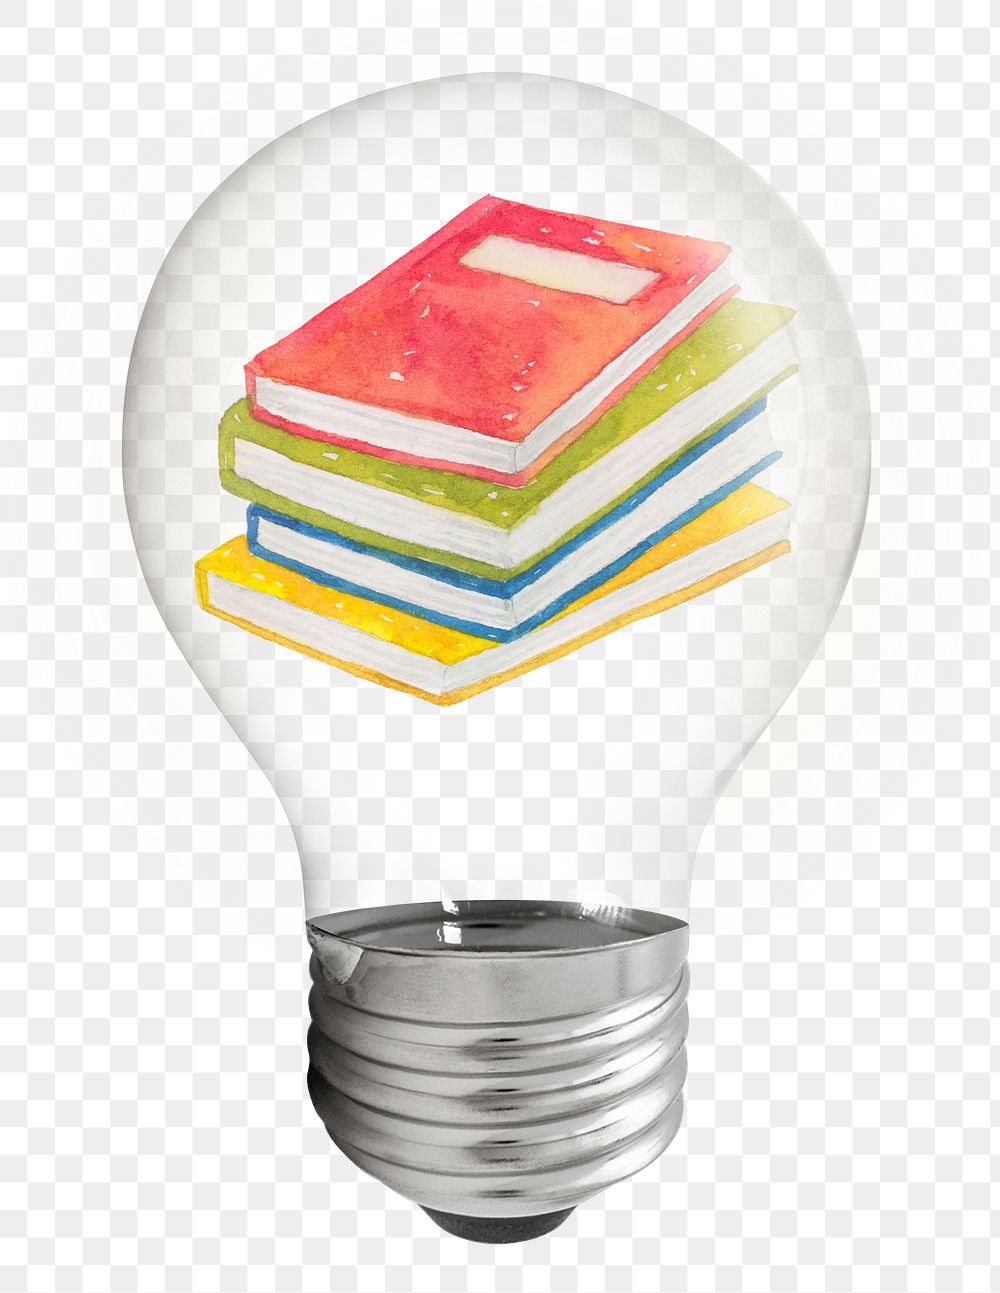 Watercolor books png sticker, light bulb stationery creative illustration on transparent background